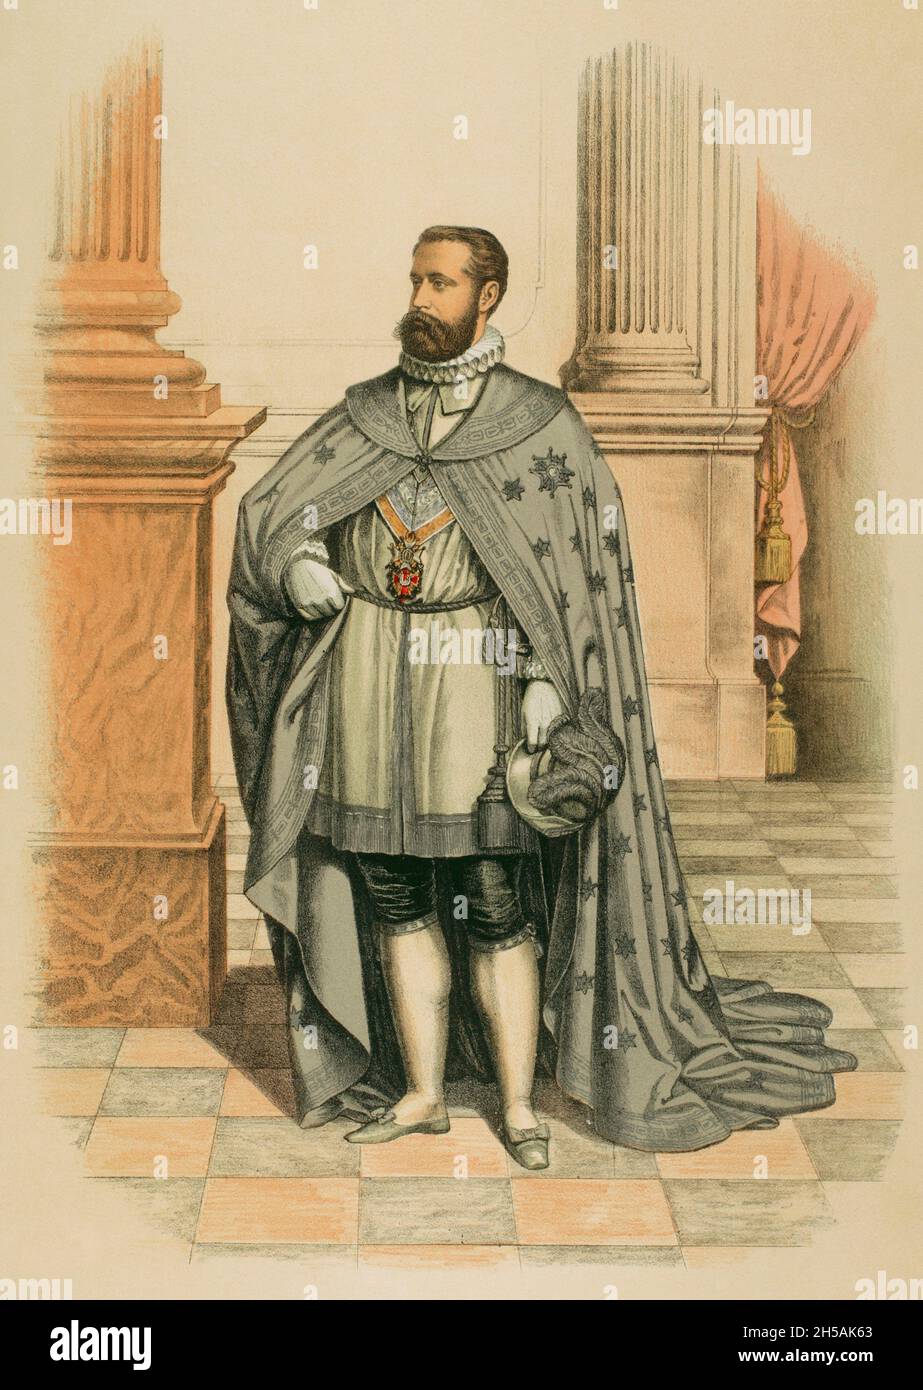 Minister Secretary of the three Orders of Charles III, Noble Ladies of Queen Maria Luisa and Isabella the Catholic, wearing the insignia of this rank and the ceremonial dress of Commander of Number (formerly Pensioner Knights) of the Royal and Distinguished Order of Charles III. Chromolithography. 'Historia de las Ordenes de Caballería y de las Condecoraciones Españolas (History of the Orders of Chivalry and the Spanish Decorations). Madrid, 1865. Spain. Stock Photo